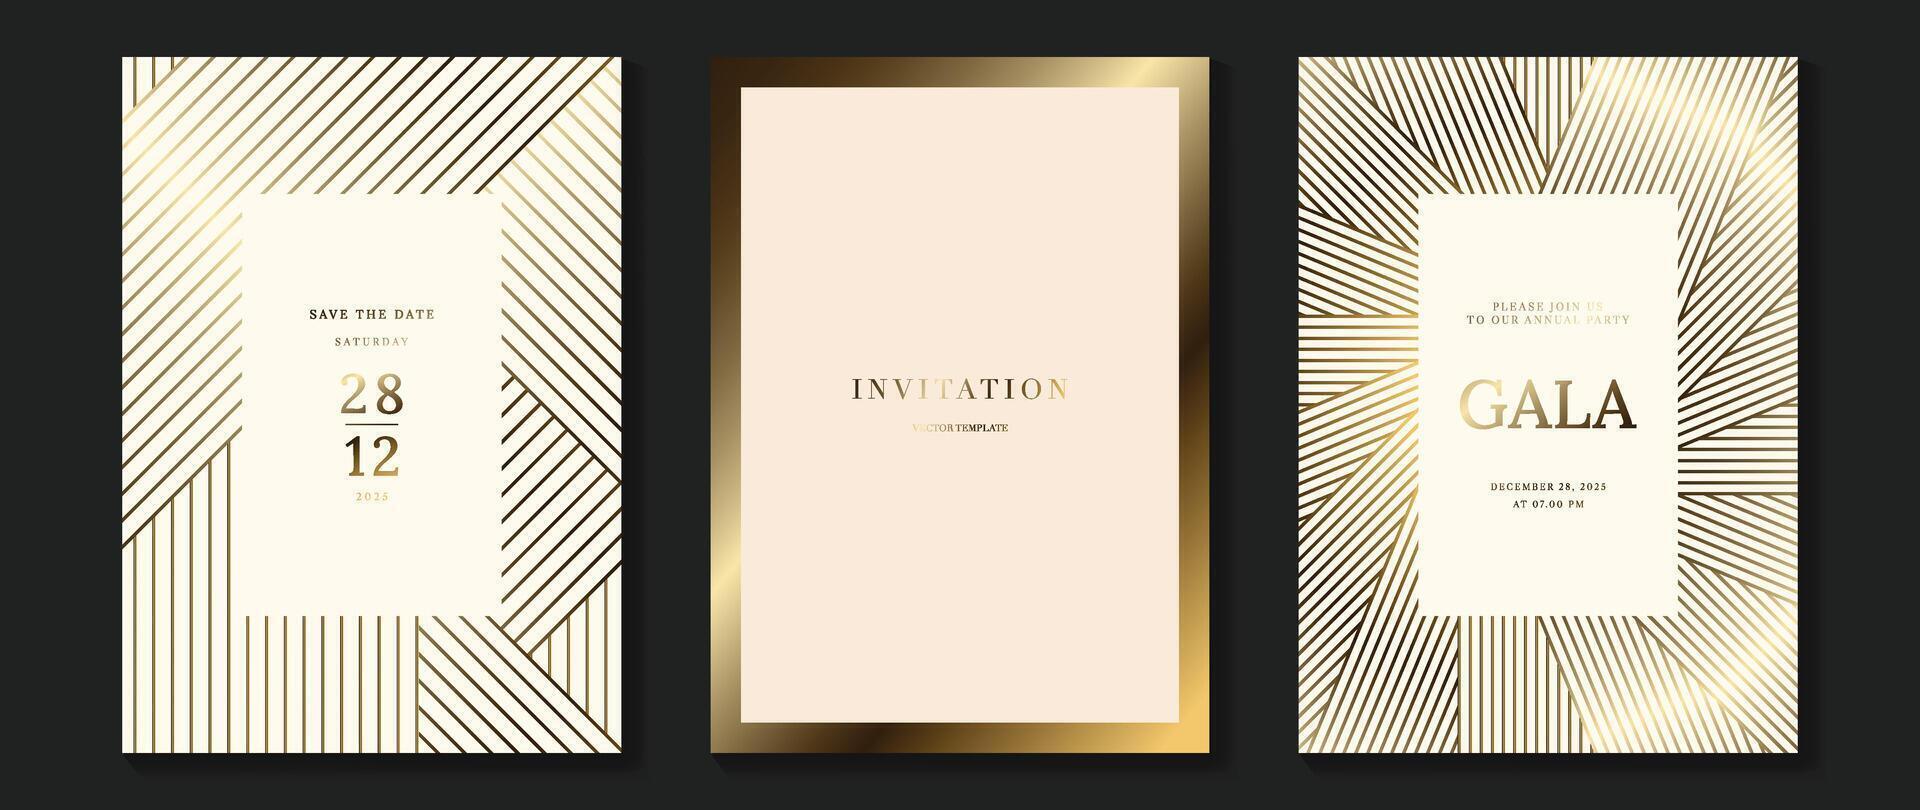 Luxury invitation card background vector. Golden elegant wavy gold line pattern on light background. Premium design illustration for wedding and vip cover template, grand opening. vector